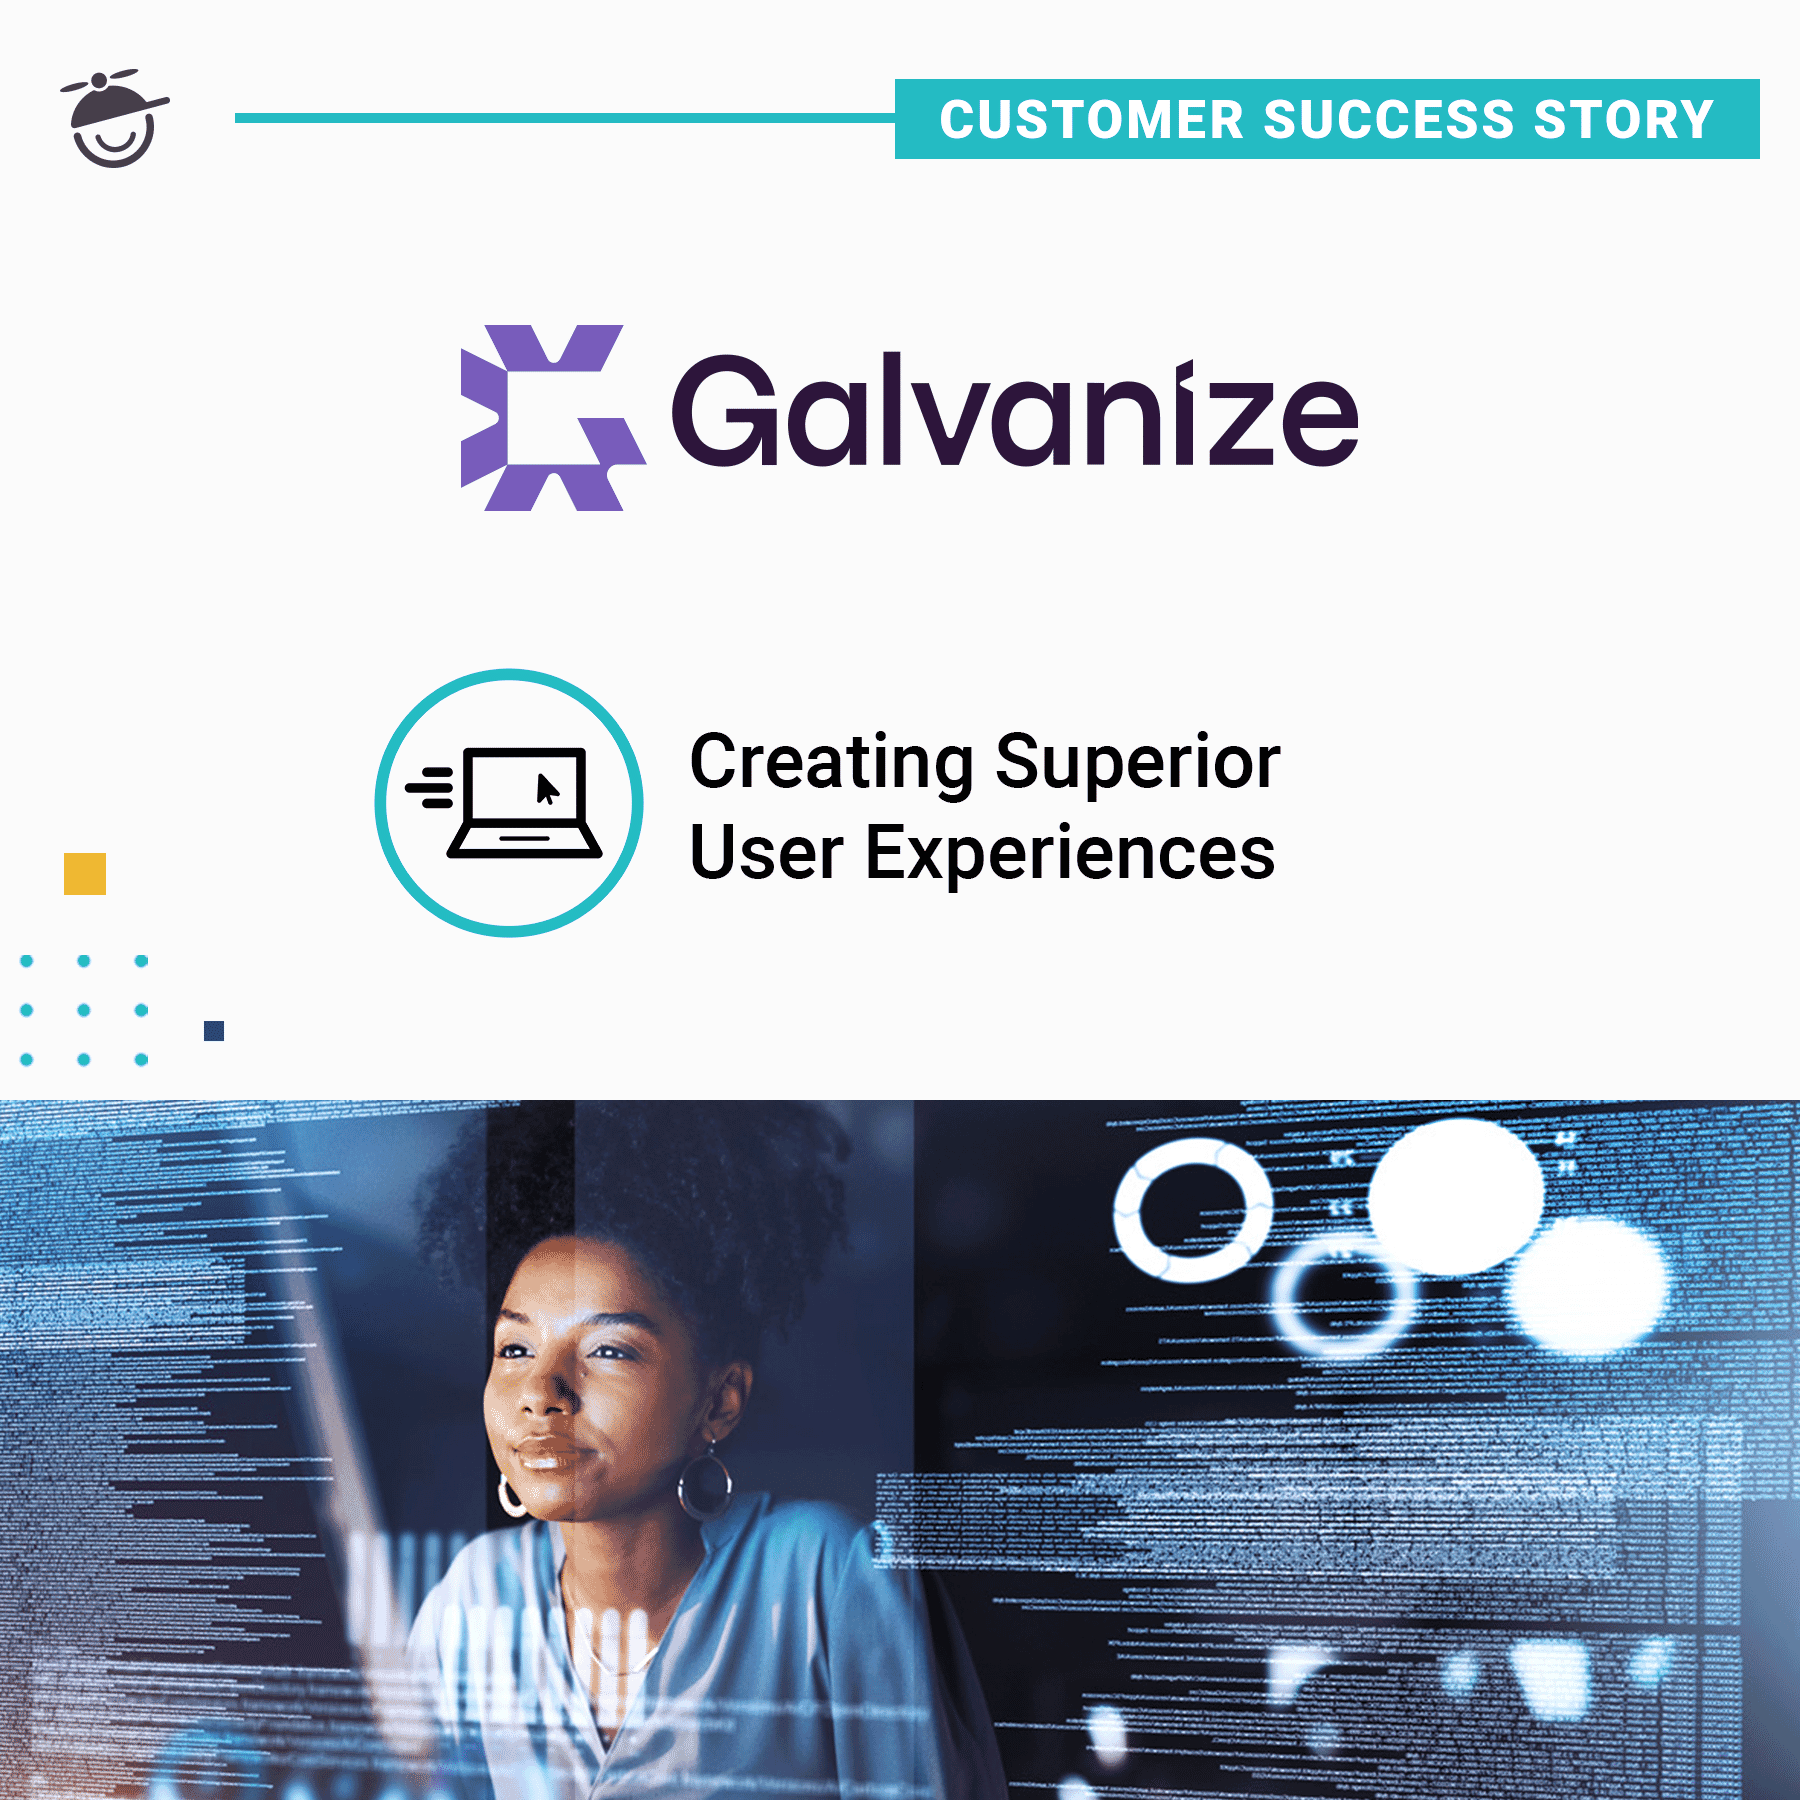 Three Takeaways From Our Latest Customer Success Story From Galvanize